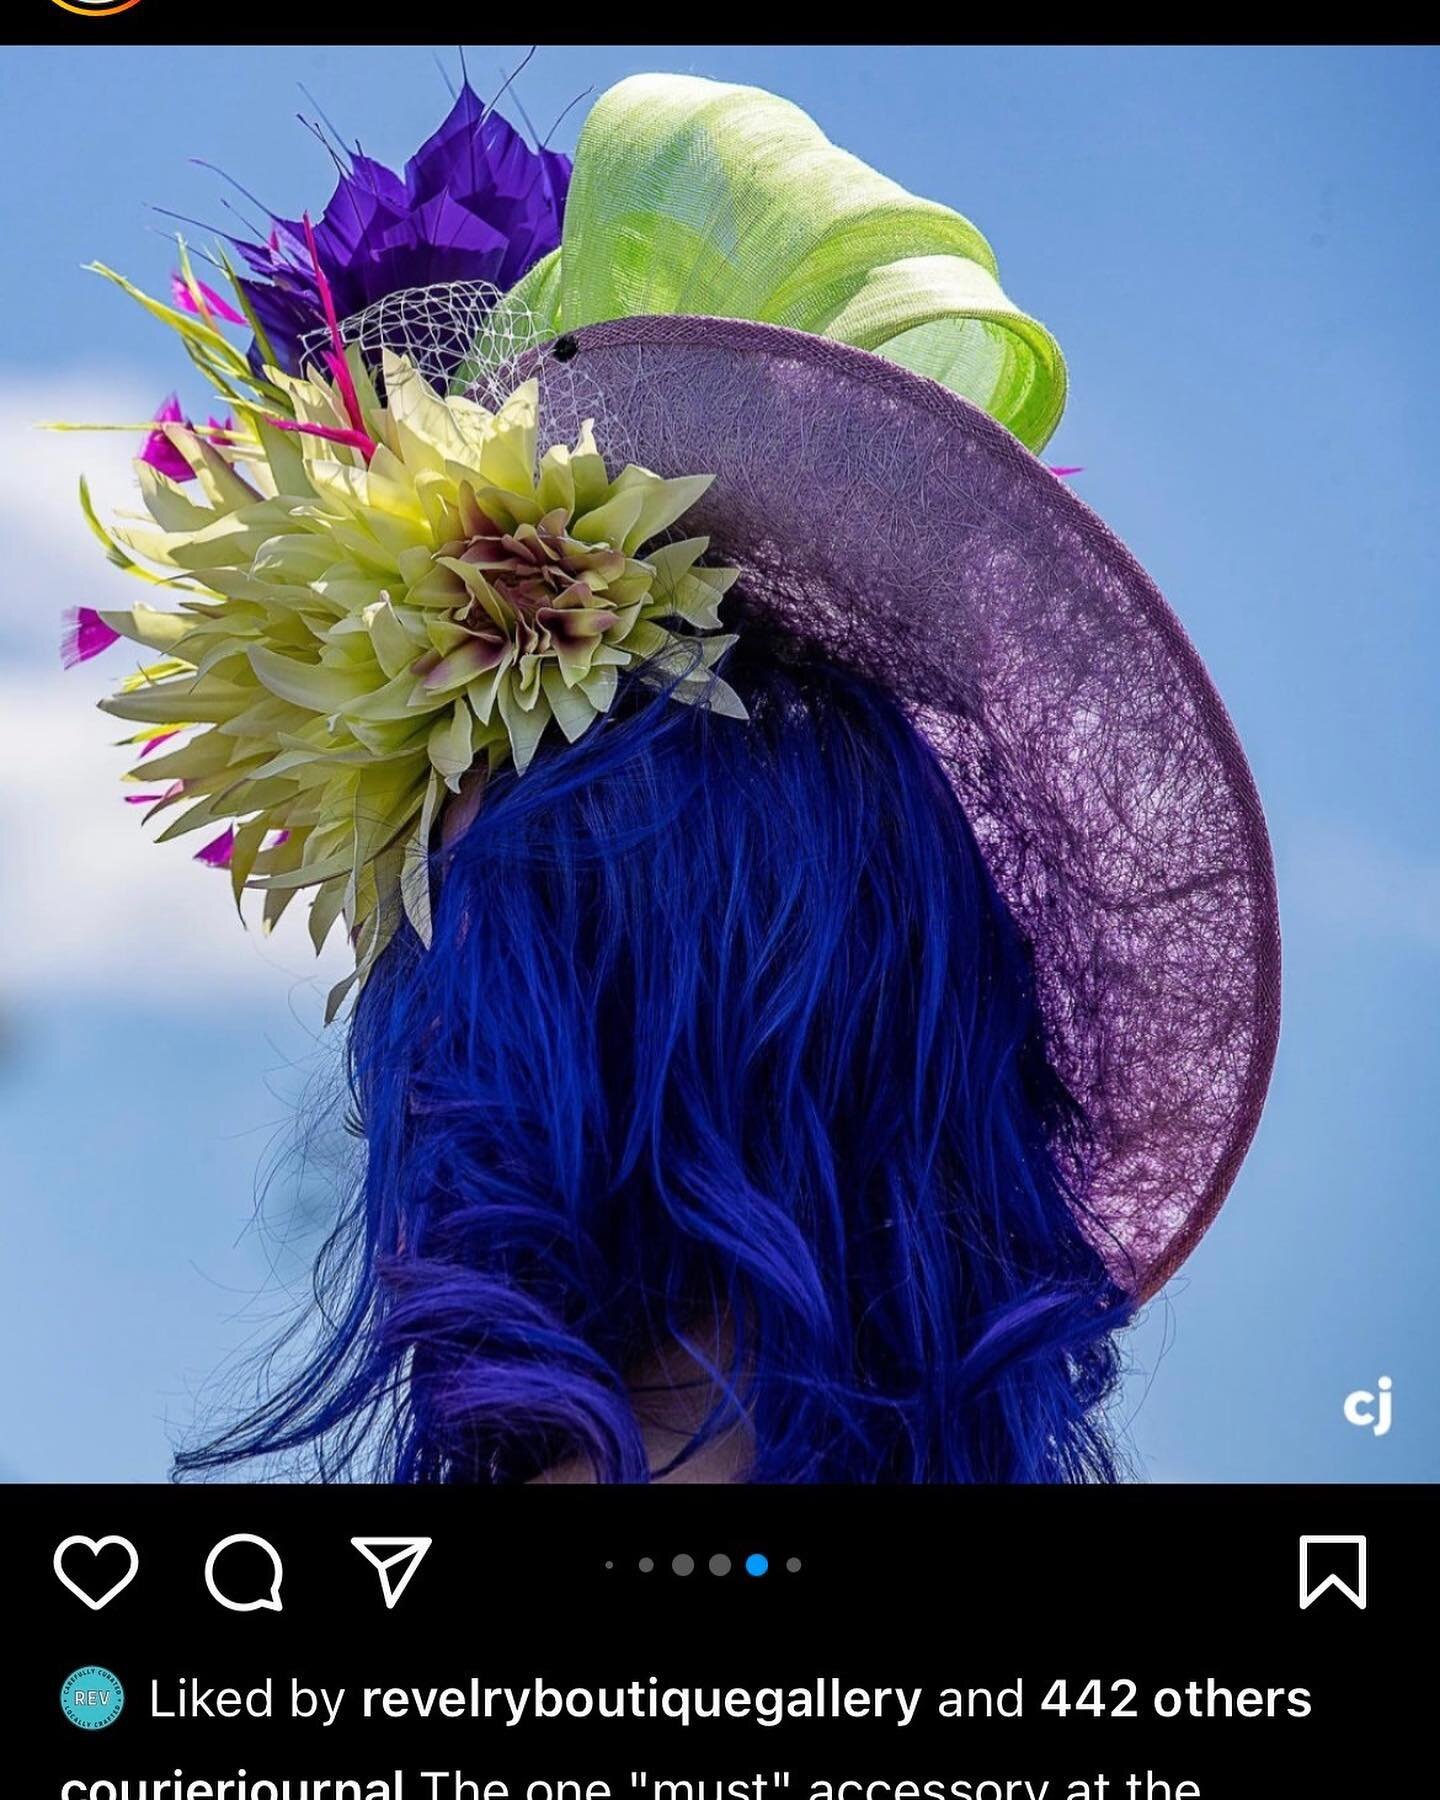 When your fascinators are as pretty from behind as the front, it&rsquo;s newsworthy! @theslaycoach @jamiejoslinking @courierjournal #derby #derbyhat #fascinator #fascinators #kentuckyderby #thurby #purplehair #purplepeople